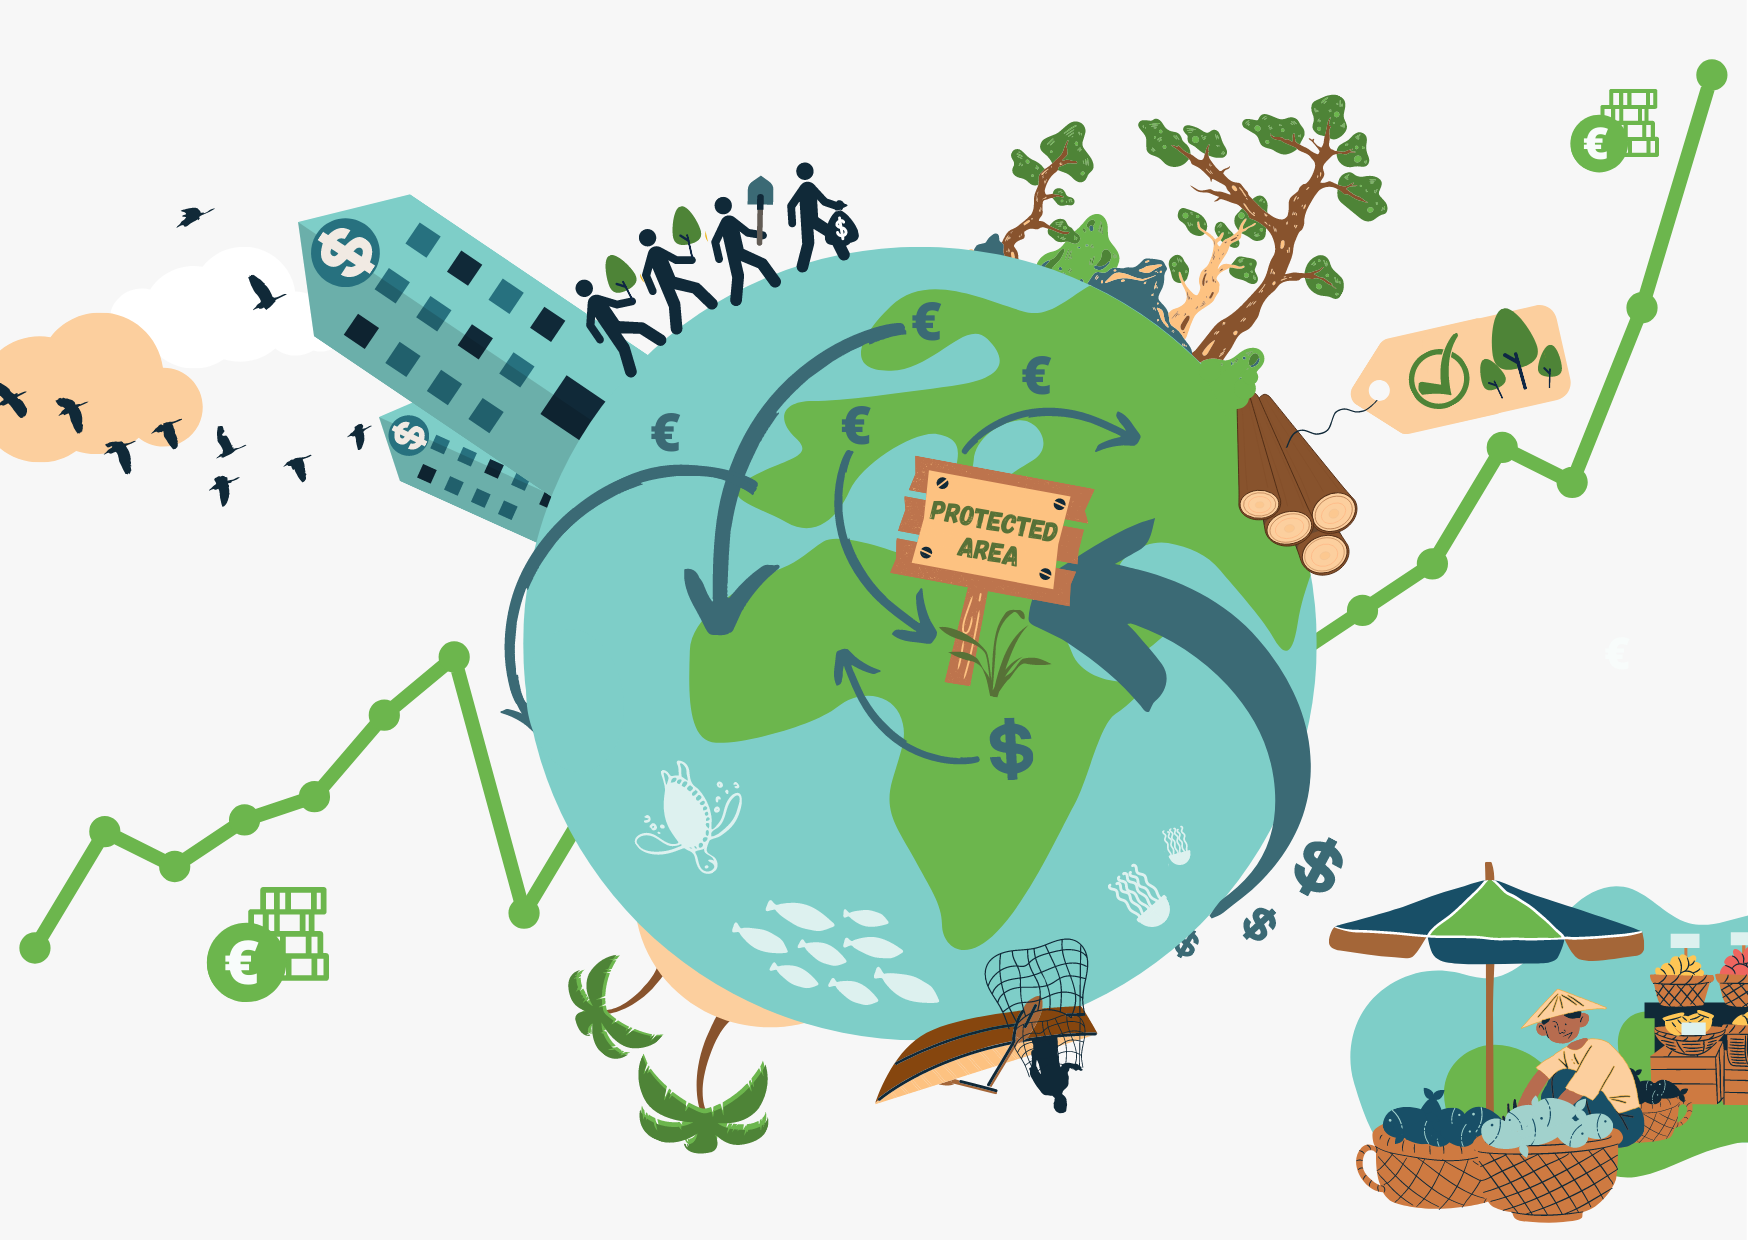 Biodiversity and finance concept image